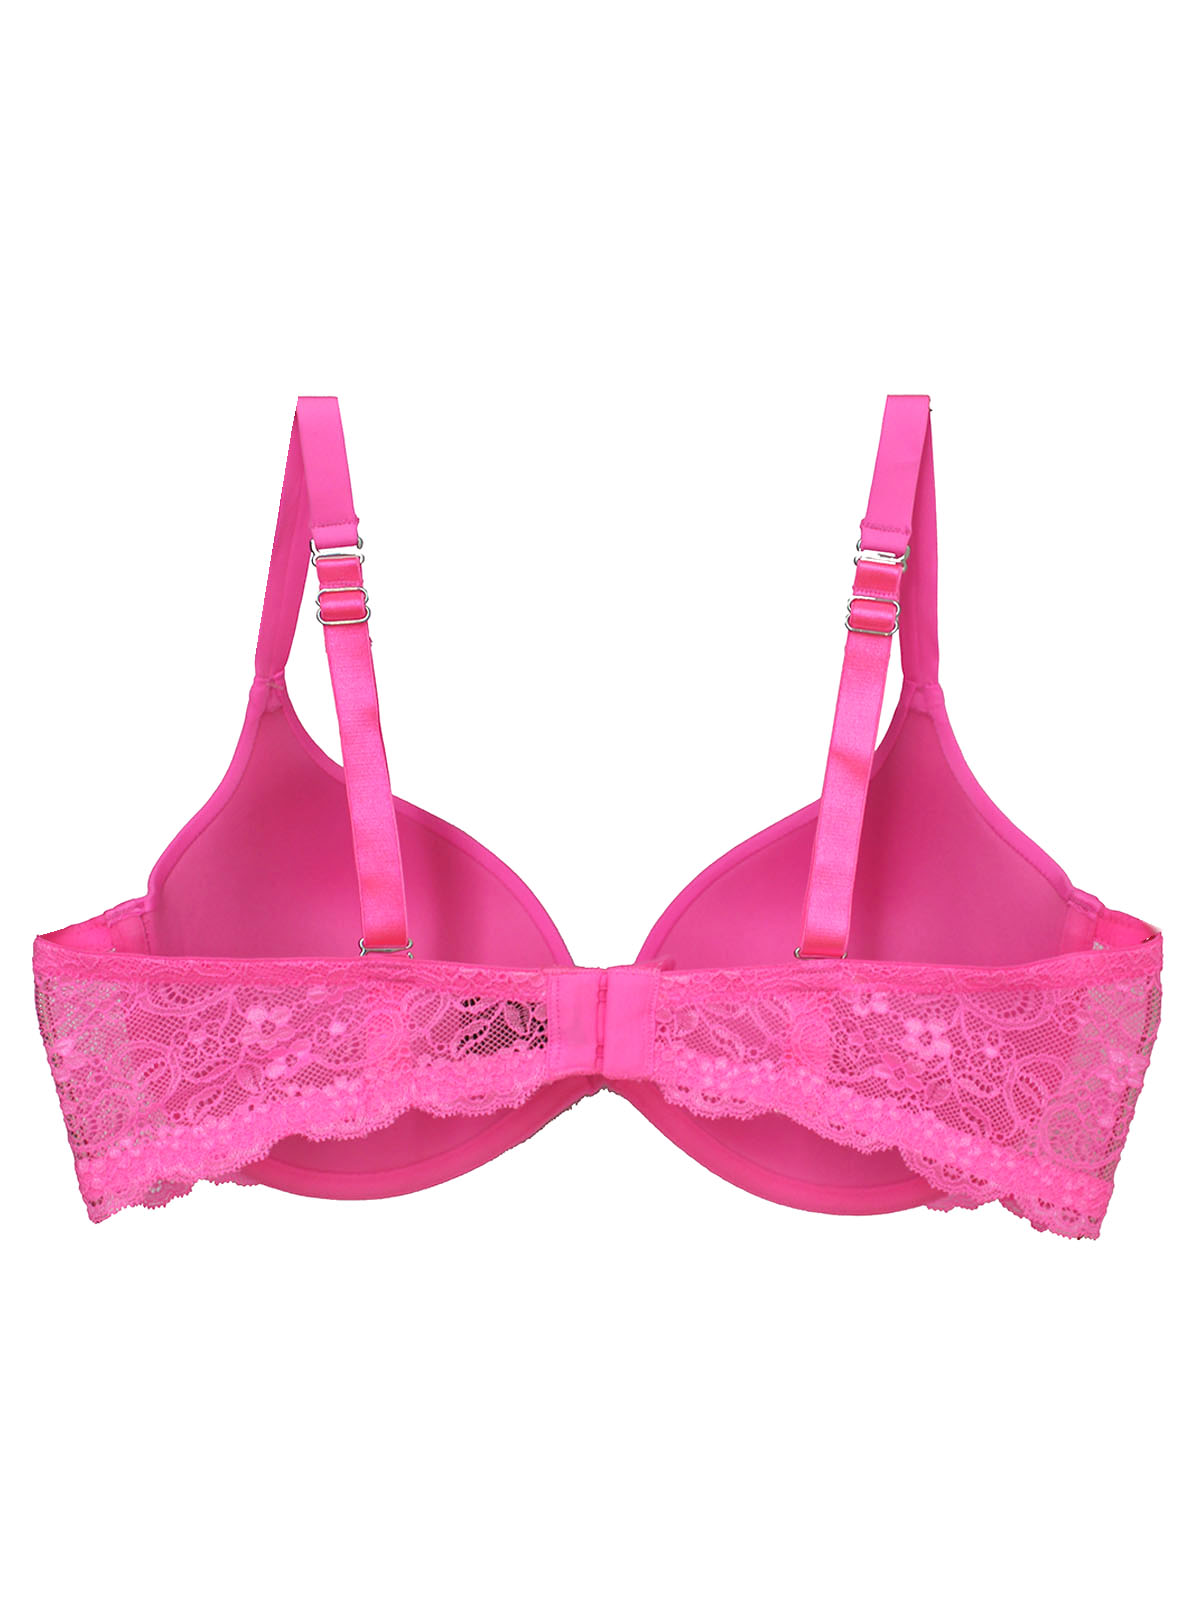 Boux Avenue embroidered lingerie set in neon pink